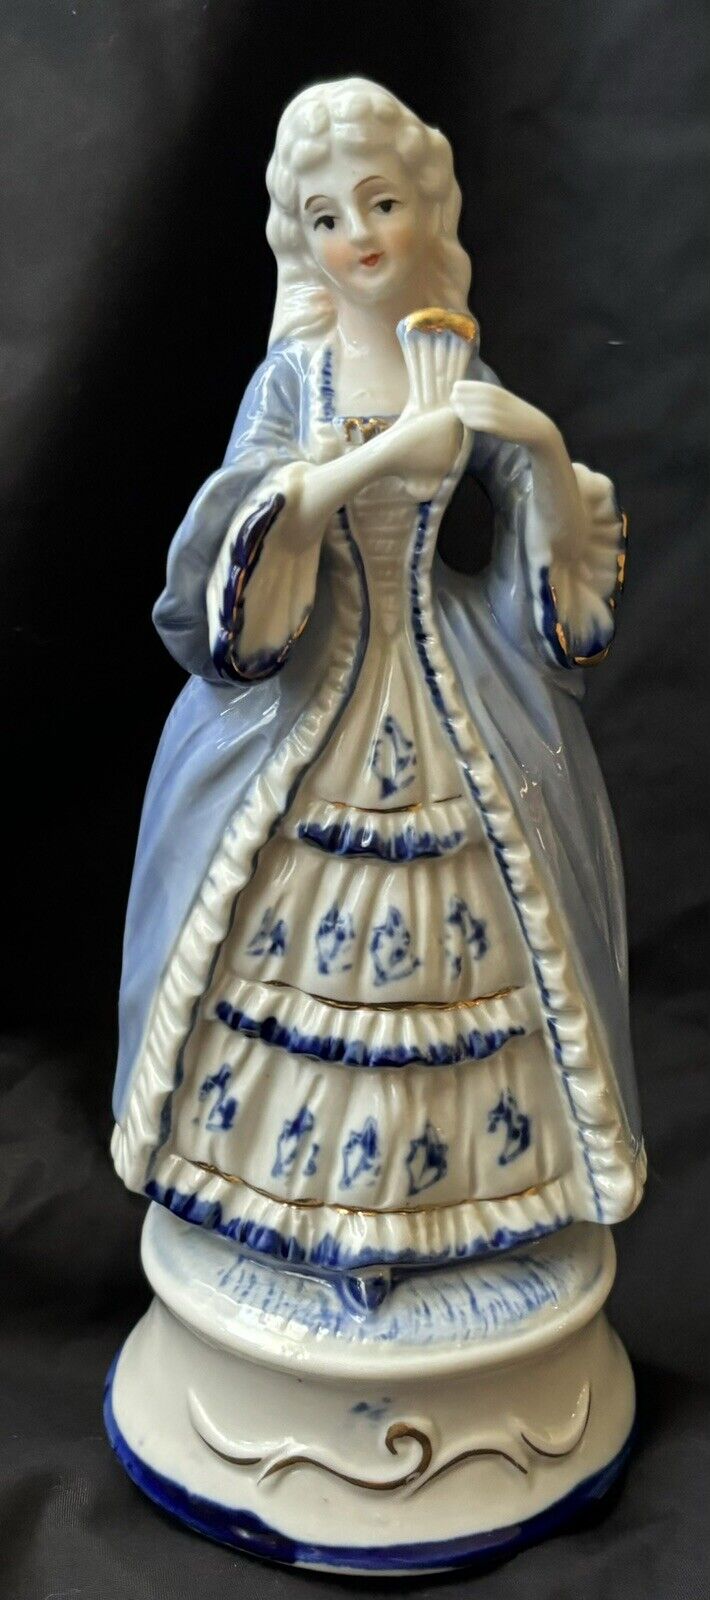 Vintage Blue And White Victorian Lady Porcelain Figurine Music Box W/gold Trim